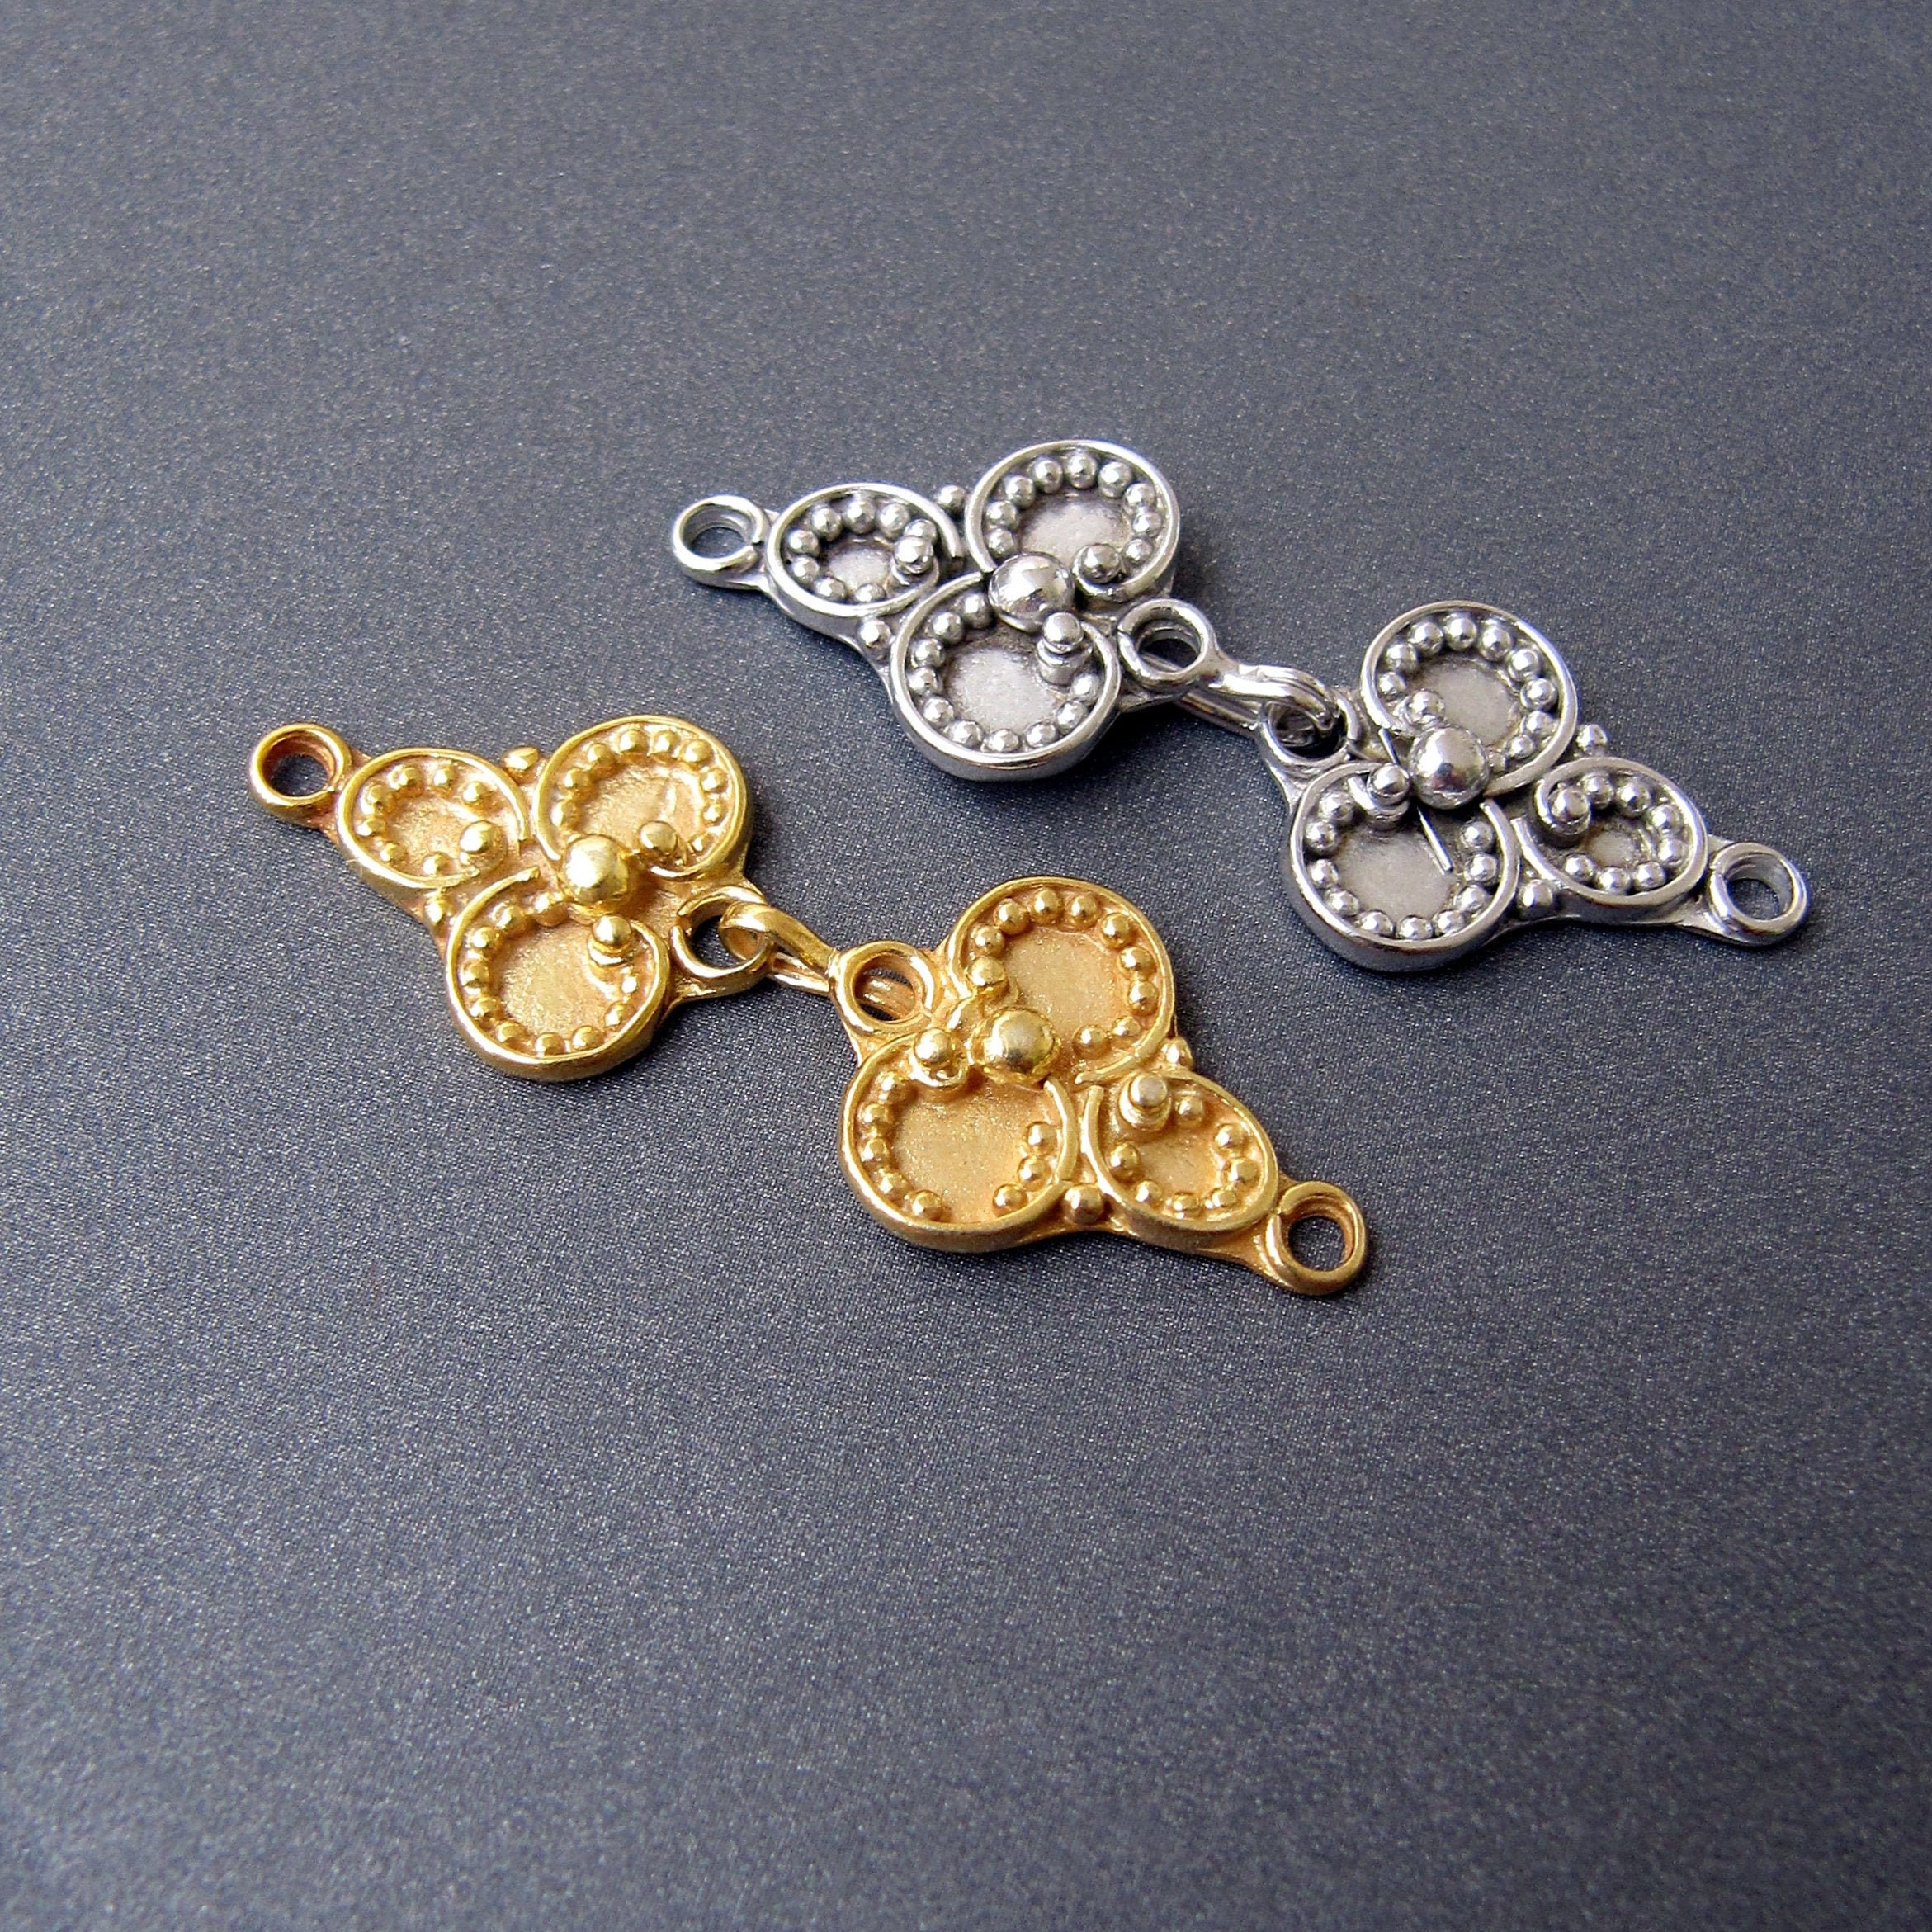 Gold S Clasp, Gold Necklace Clasps, Gold S Hook Clasp, Bracelet Findings,  Gold Plated Toggle, Necklace Clasp, S Clasp, 2 pc